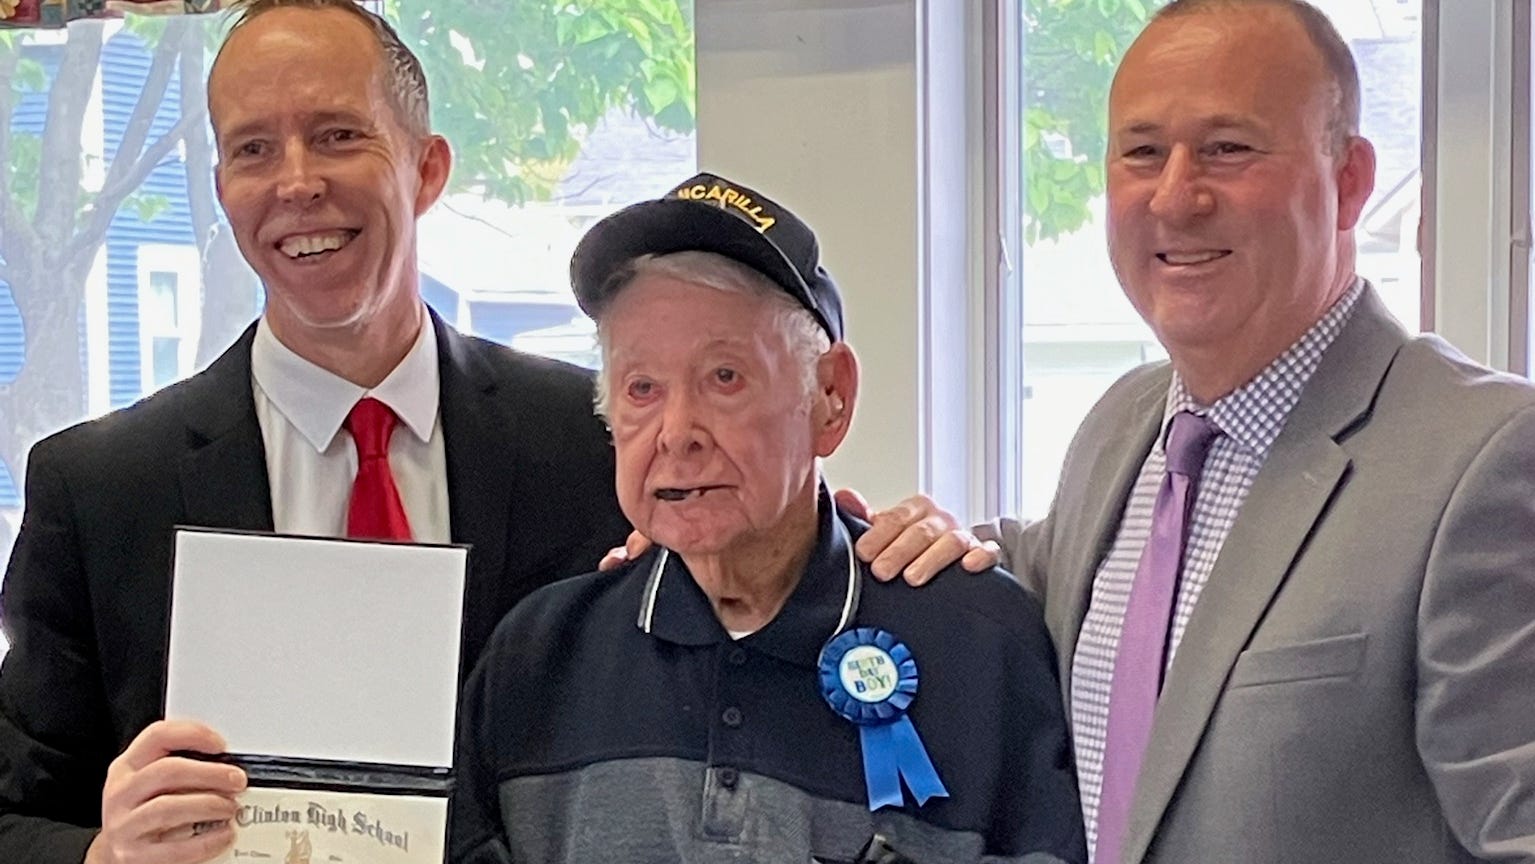 Port Clinton schools present 102-year-old man with diploma